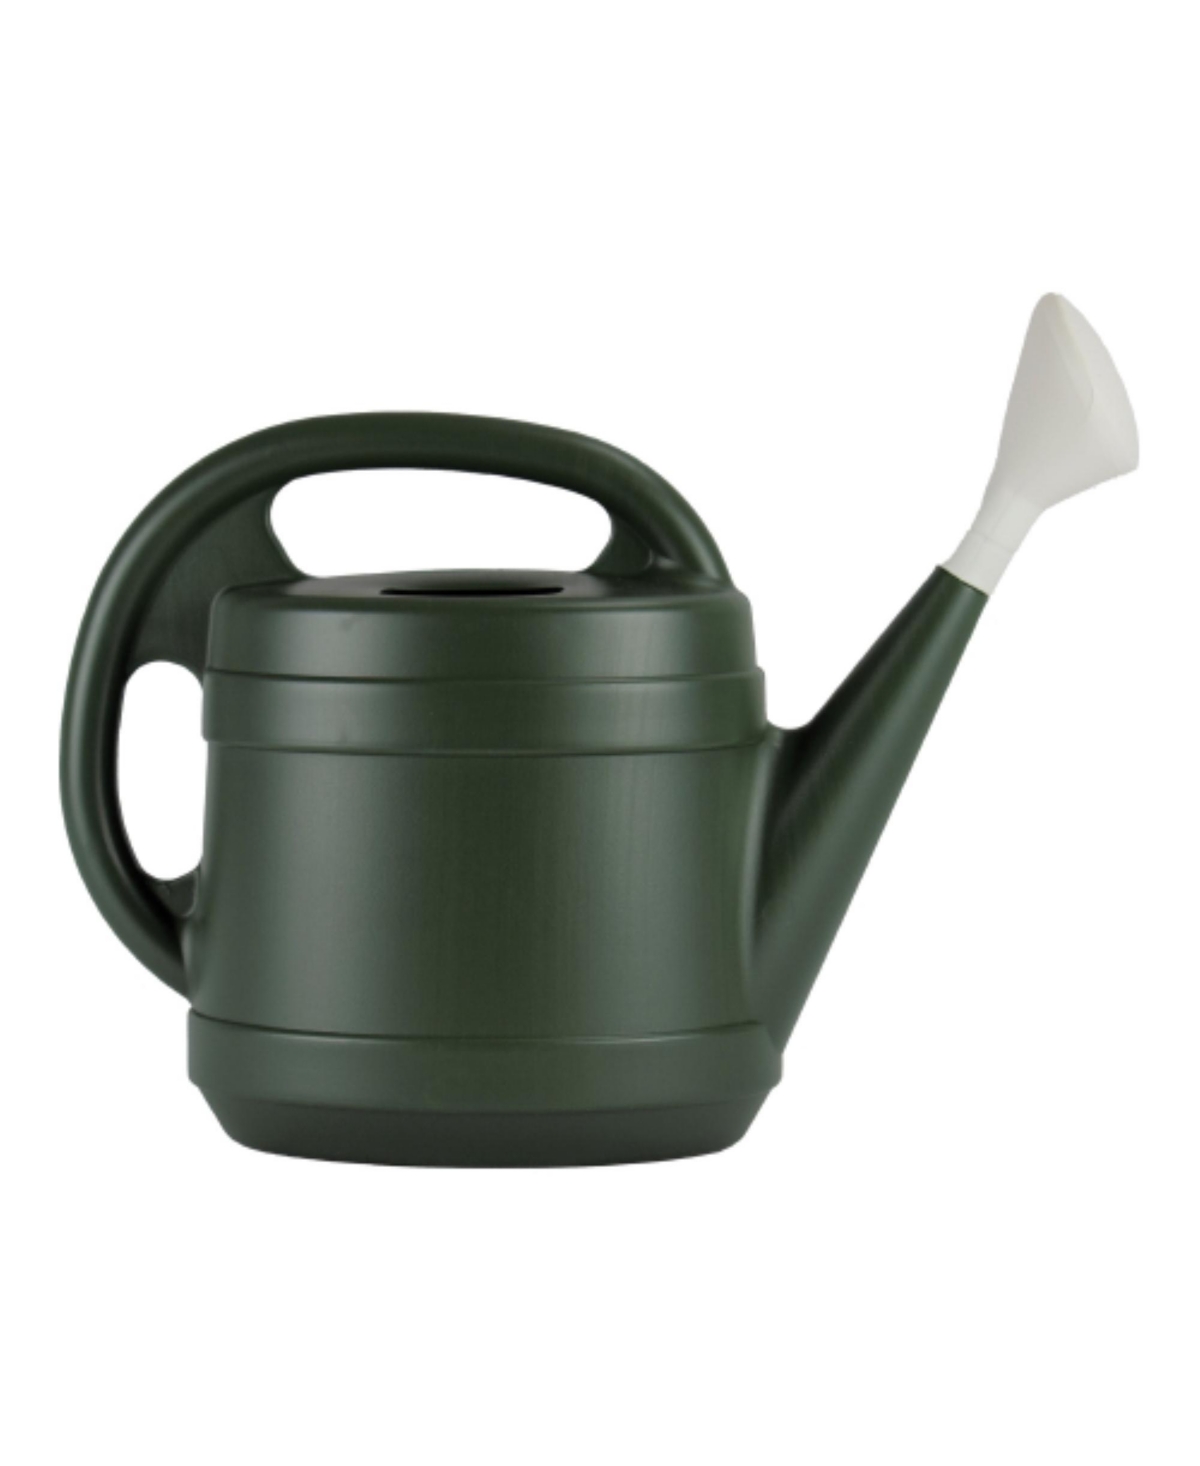 Hc Companies Plastic Standard Watering Can, Green, 2 Gallons - Green